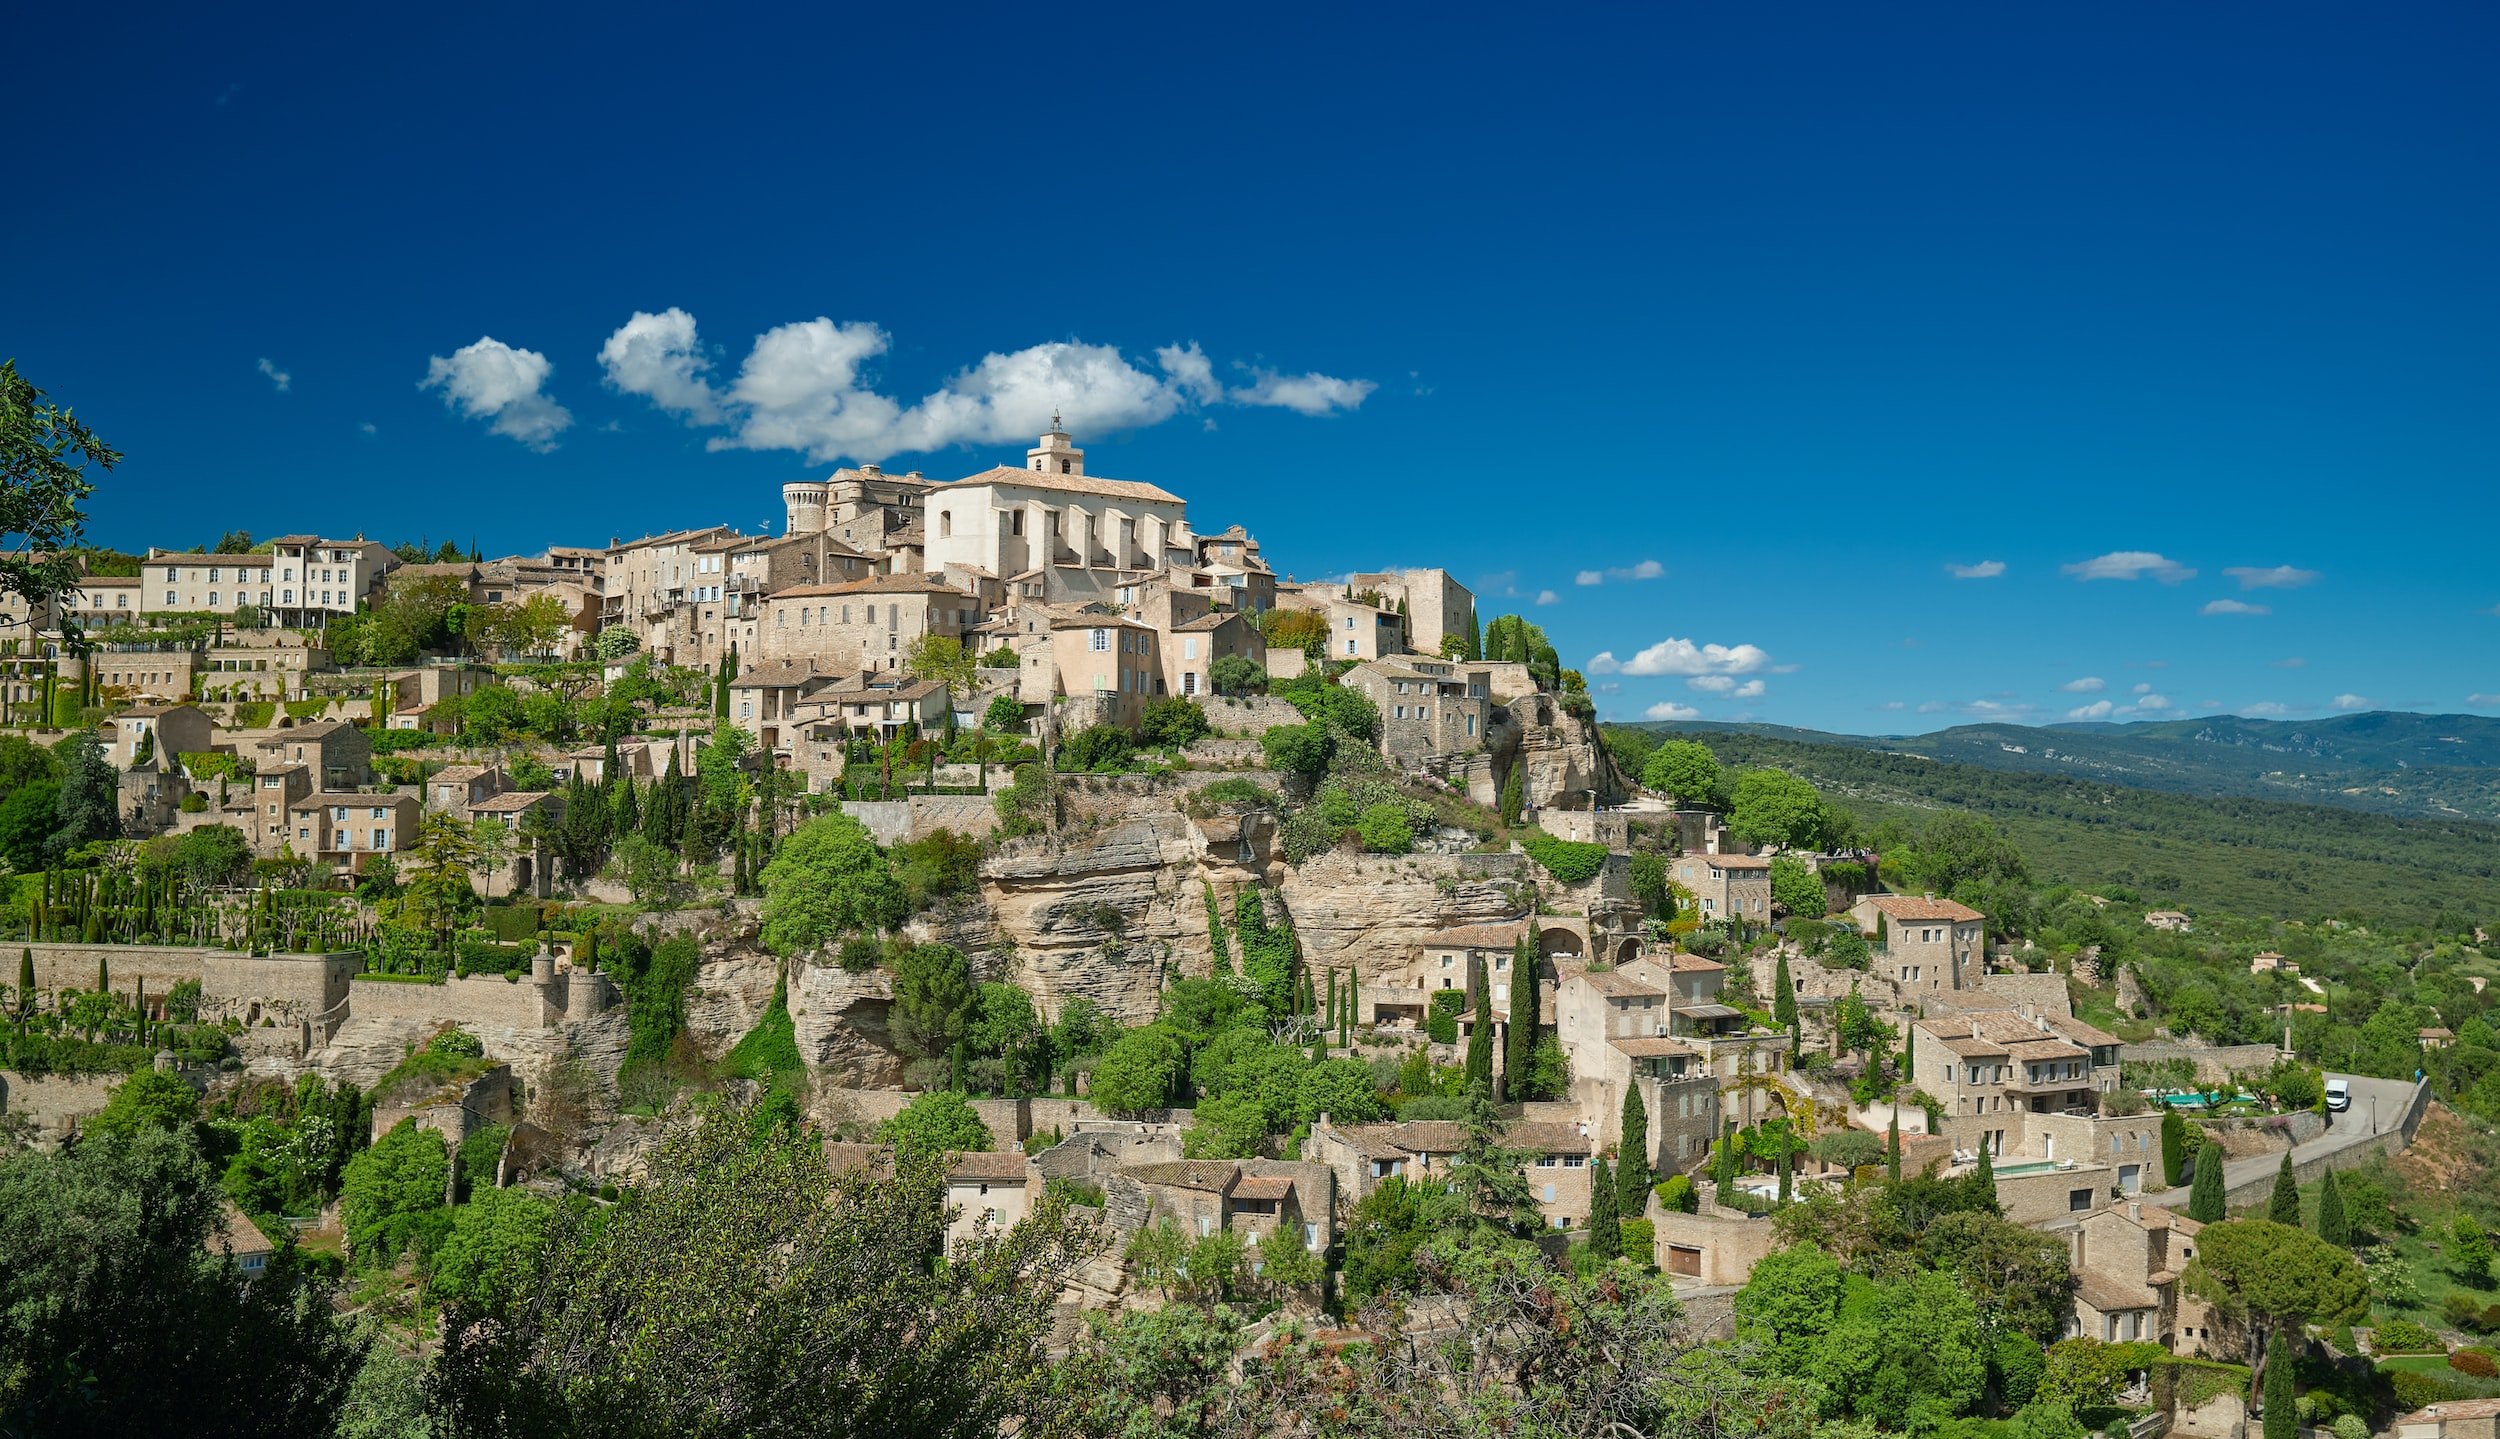 Seminar in the Luberon and cultural visit to Gordes in Provence